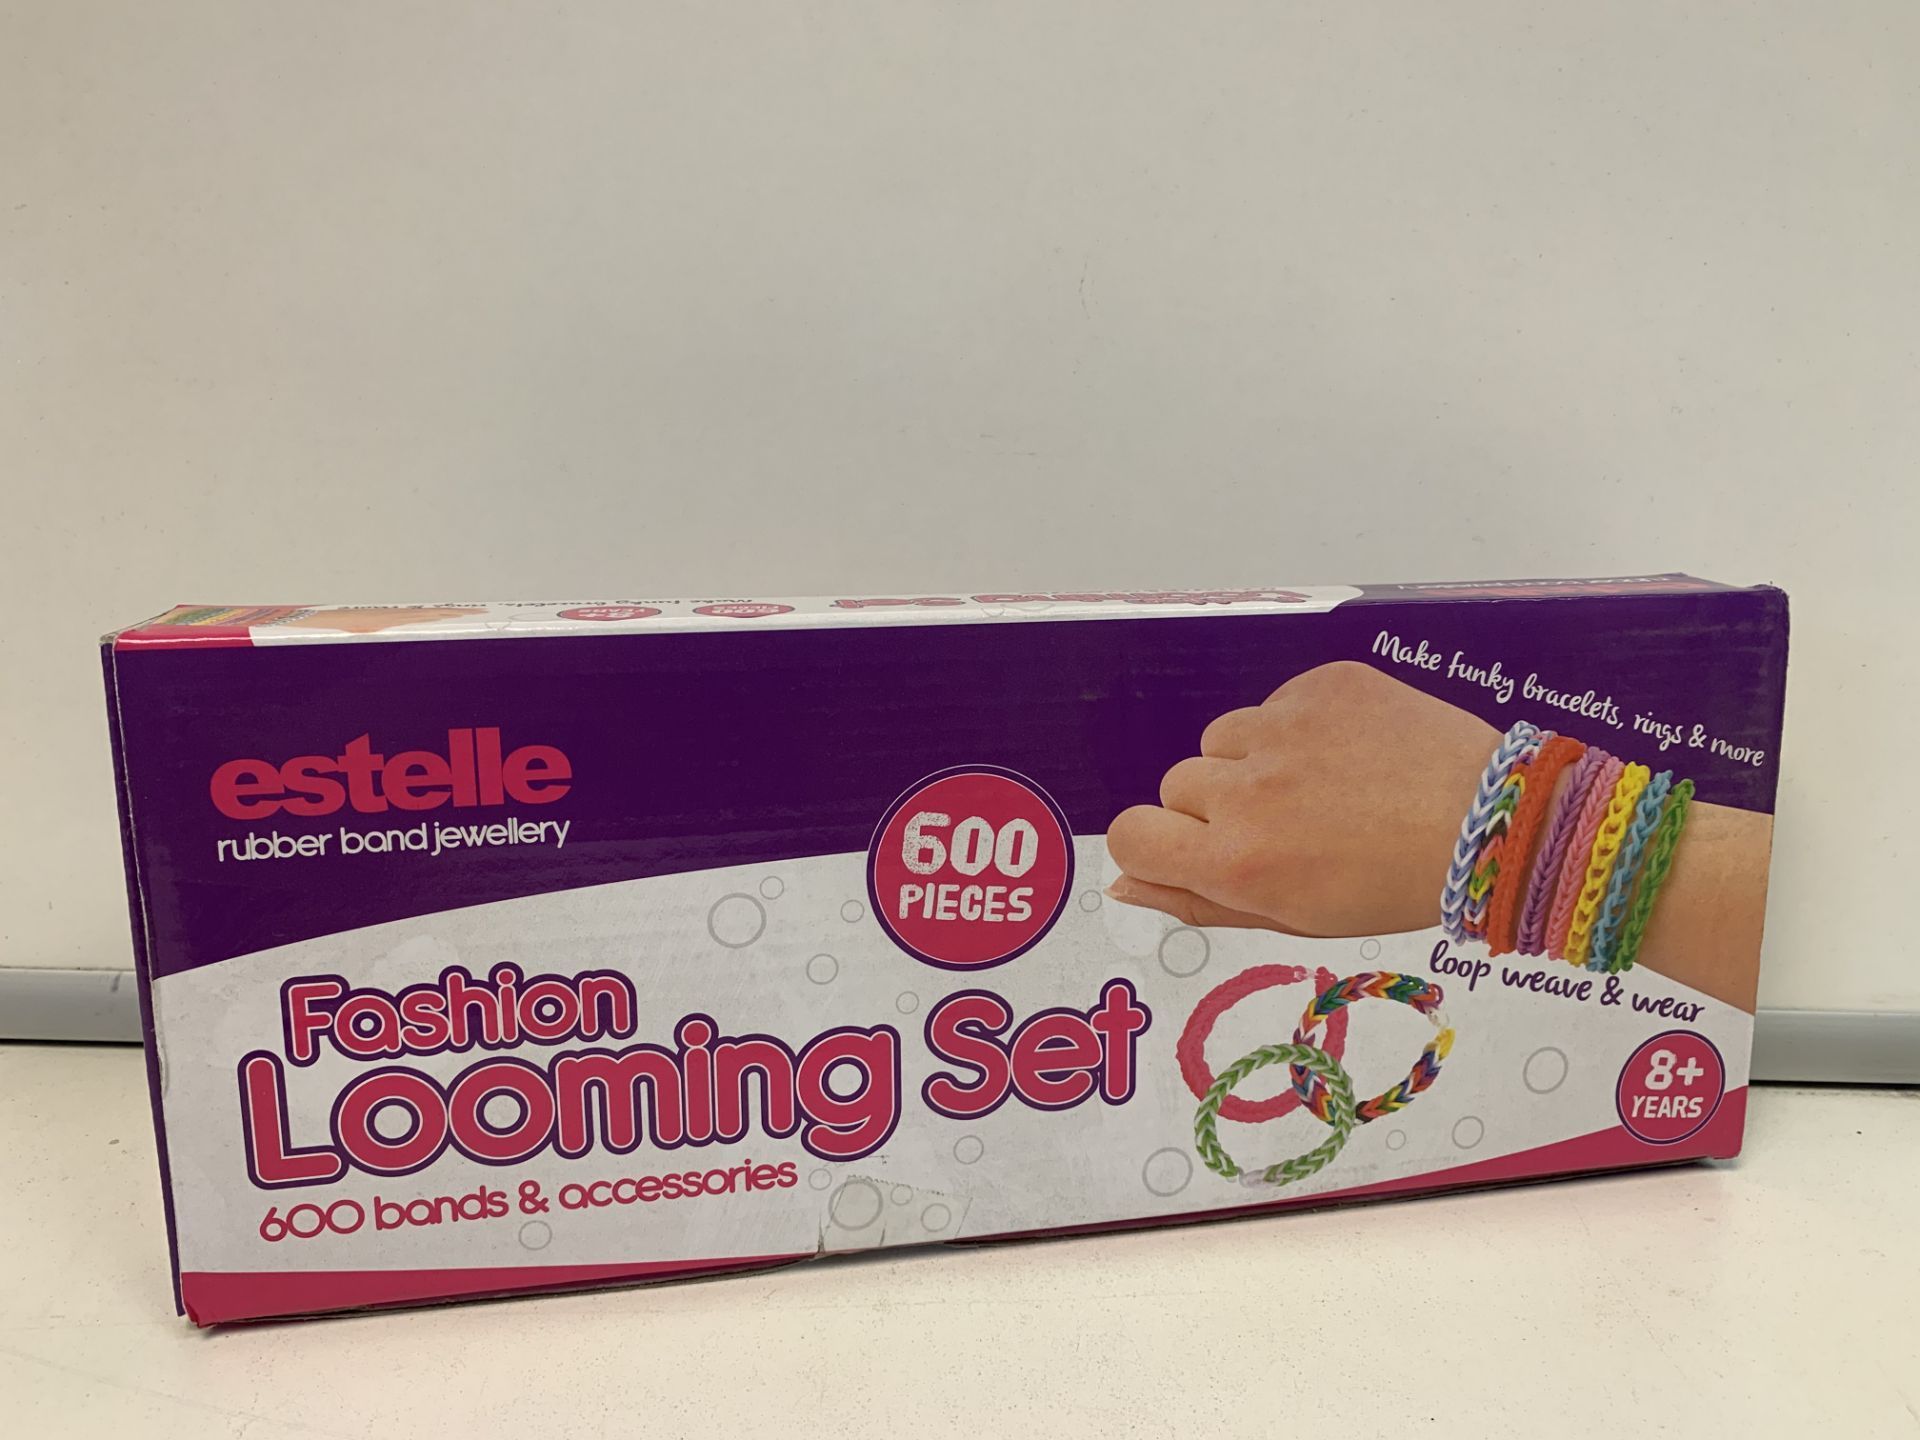 60 X NEW BOXED ESTELLE 600 PIECE FASHION LOOMING SETS. EACH INCLUDES 600 BANDS & ACCESSORIES (1628/